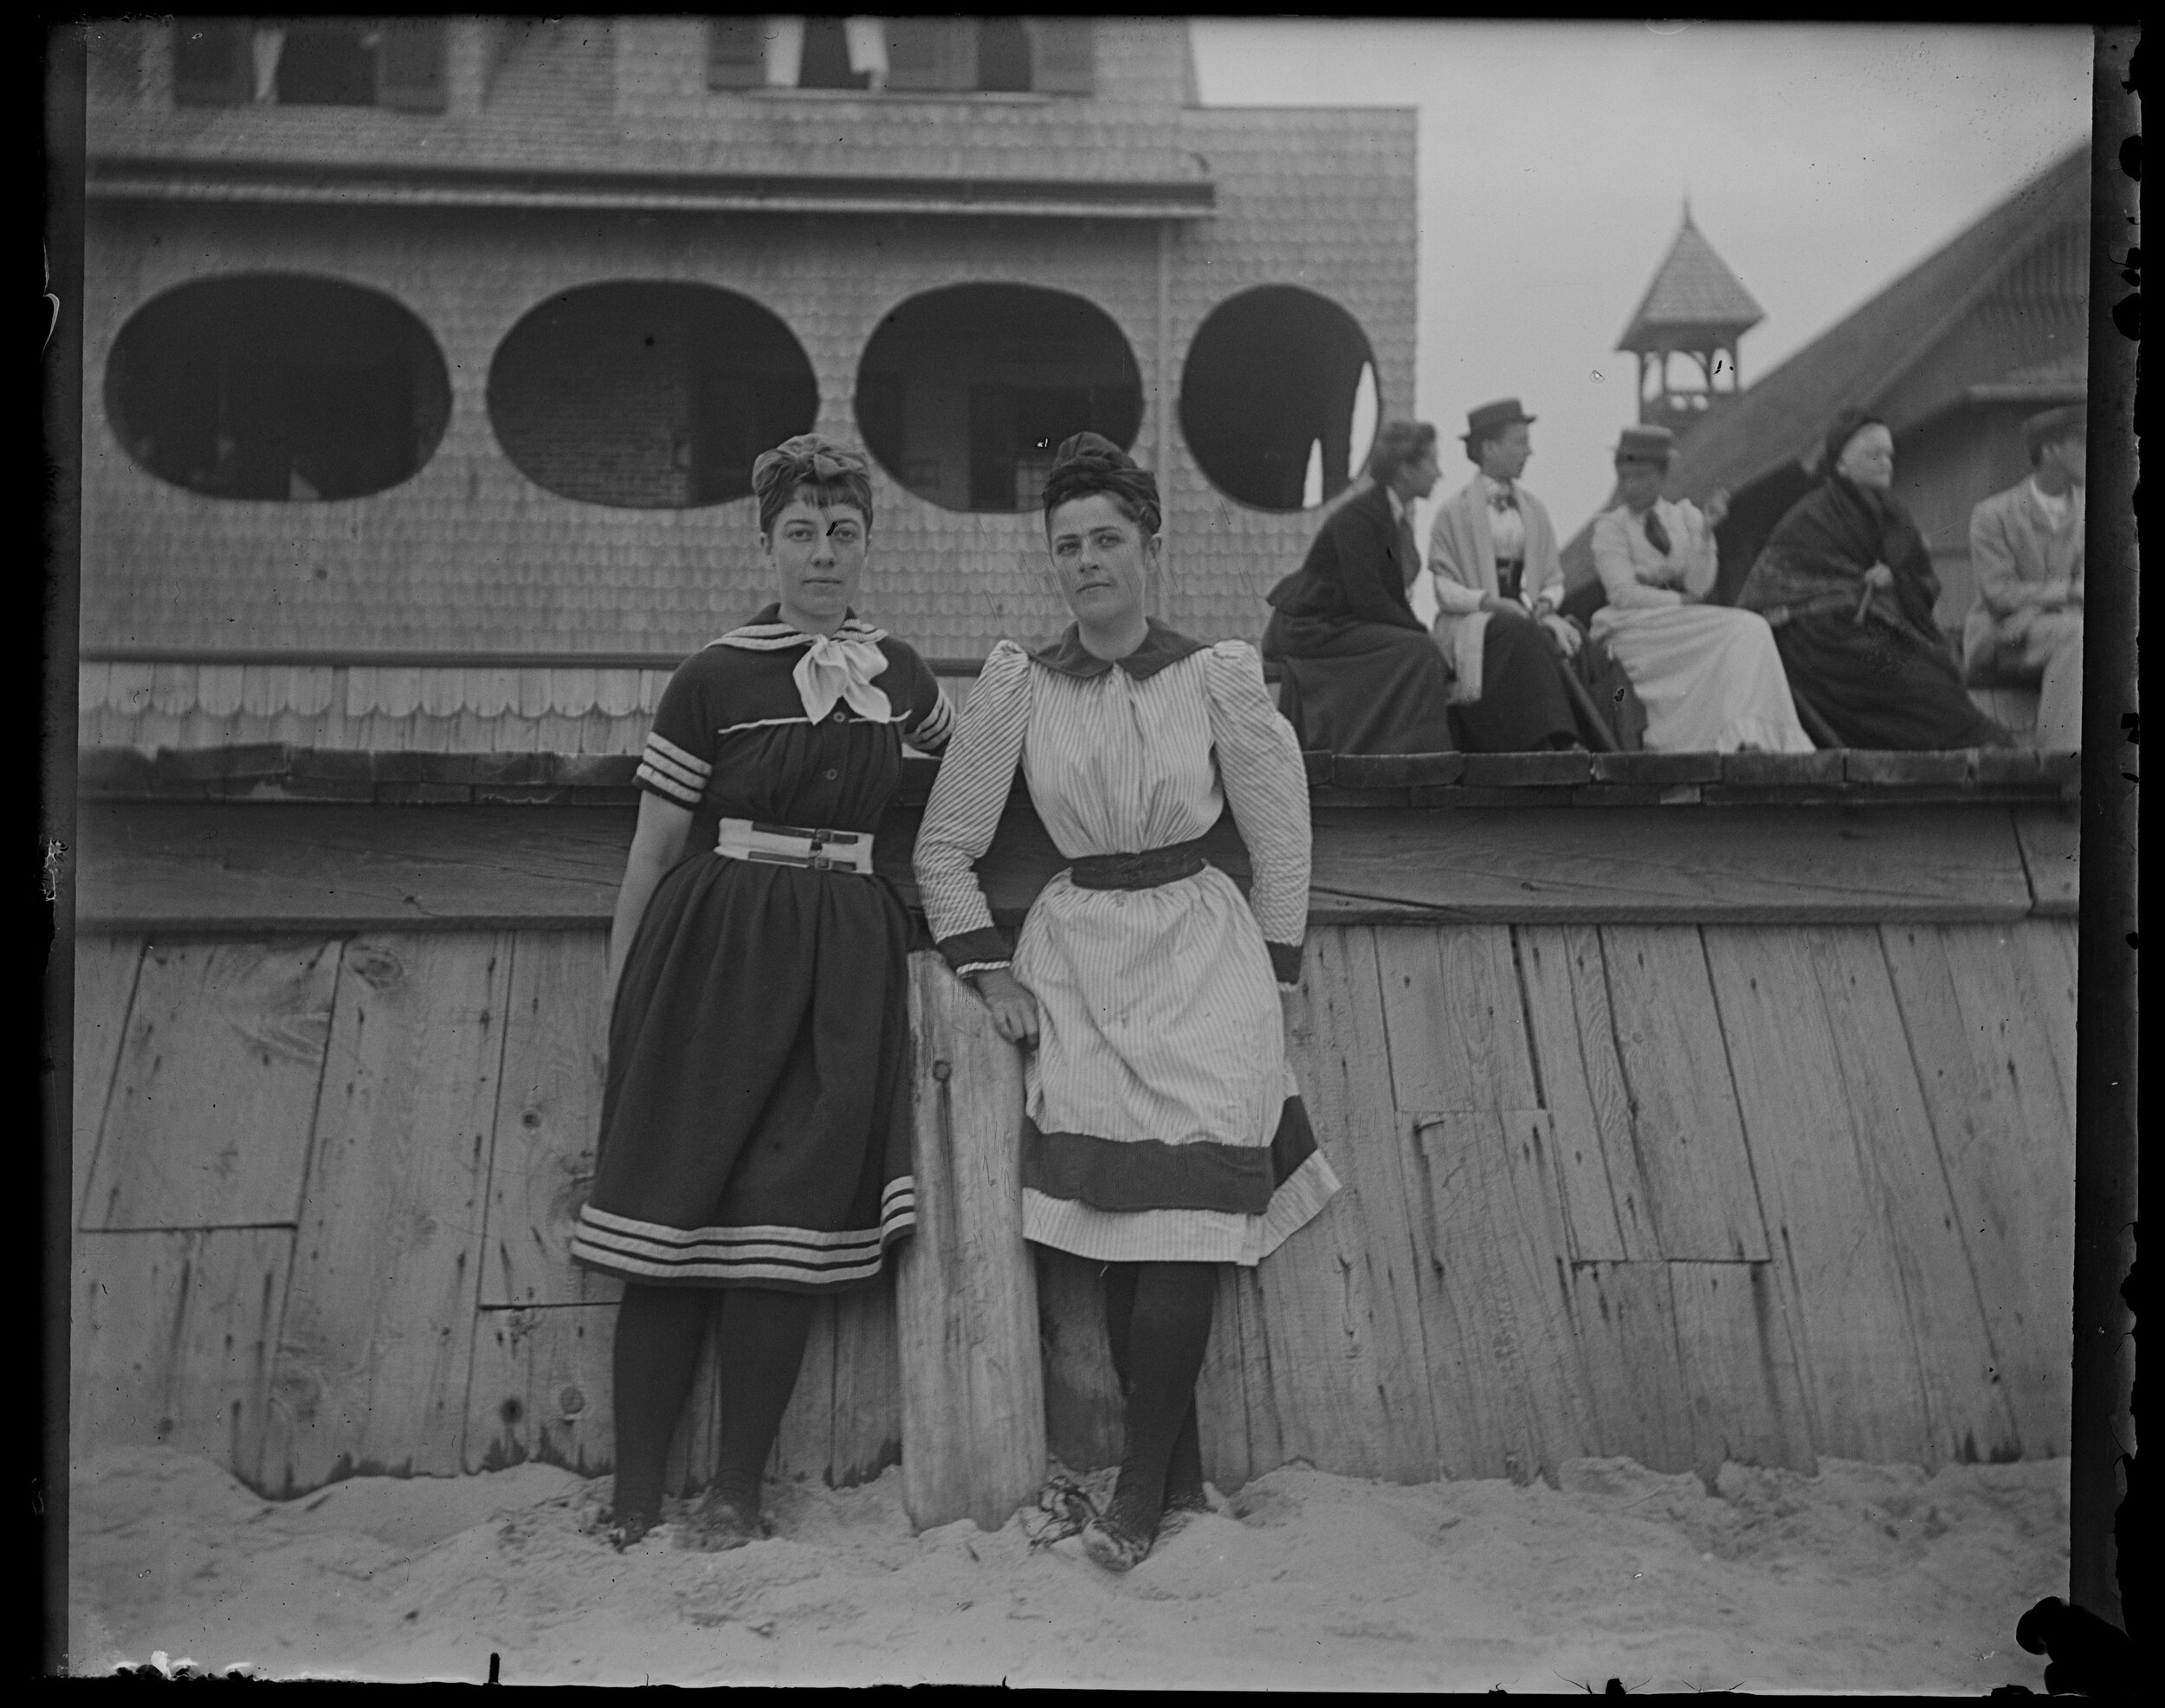  Alice Austen (left) and Annie Collins (right) on the beach at Bay Head, New Jersey. Photo by Alice Austen, August 25, 1891.  